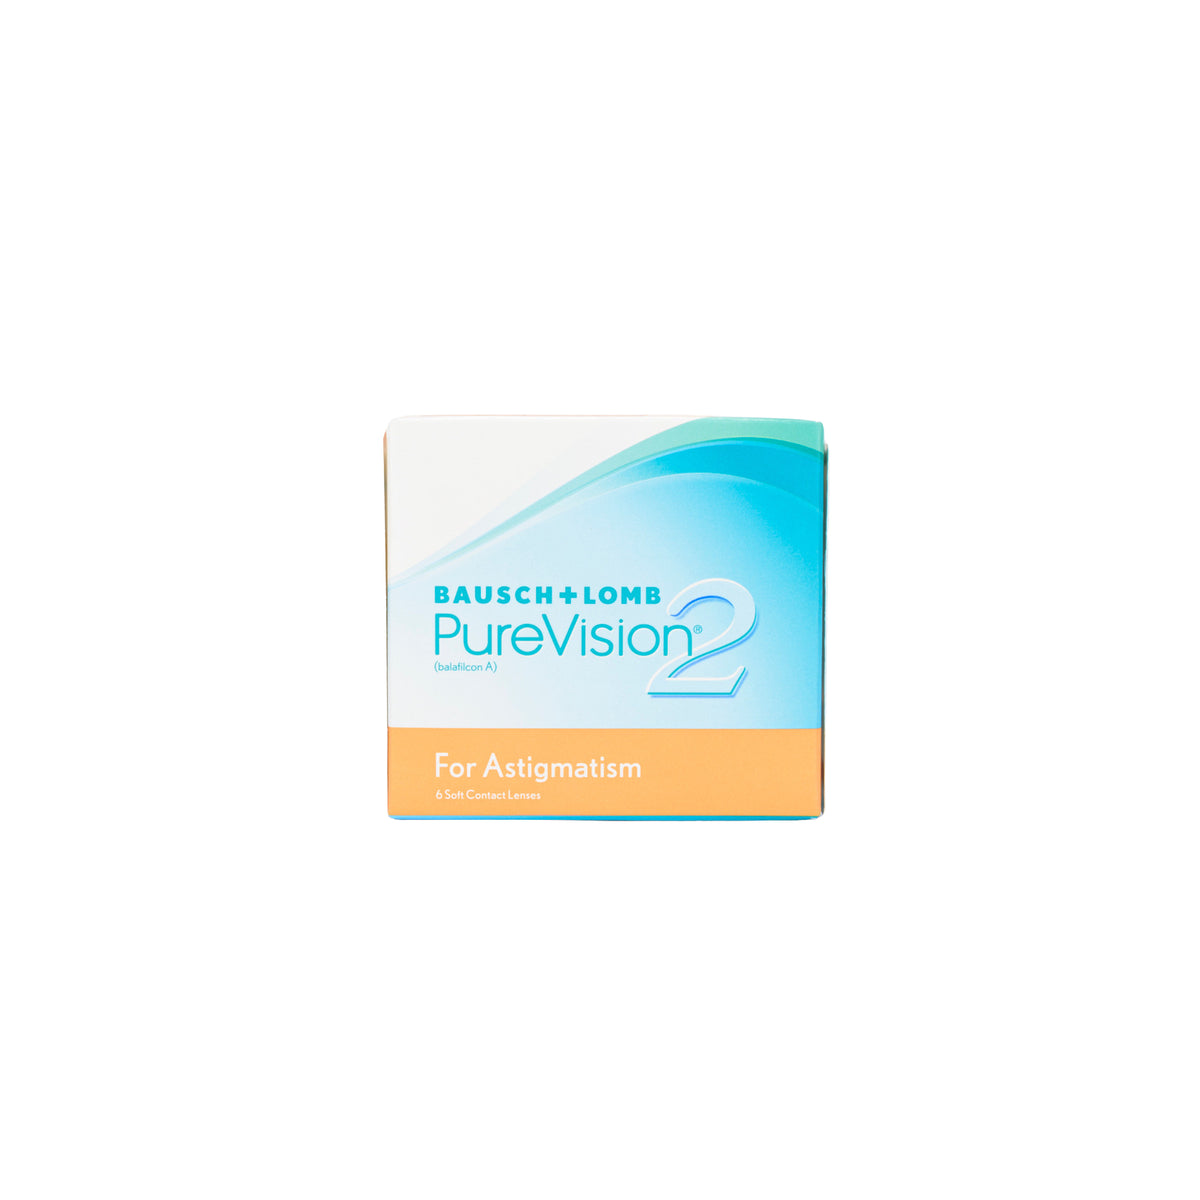 PureVision 2 Astigmatism 6 Contact Lenses Bausch & Lomb   